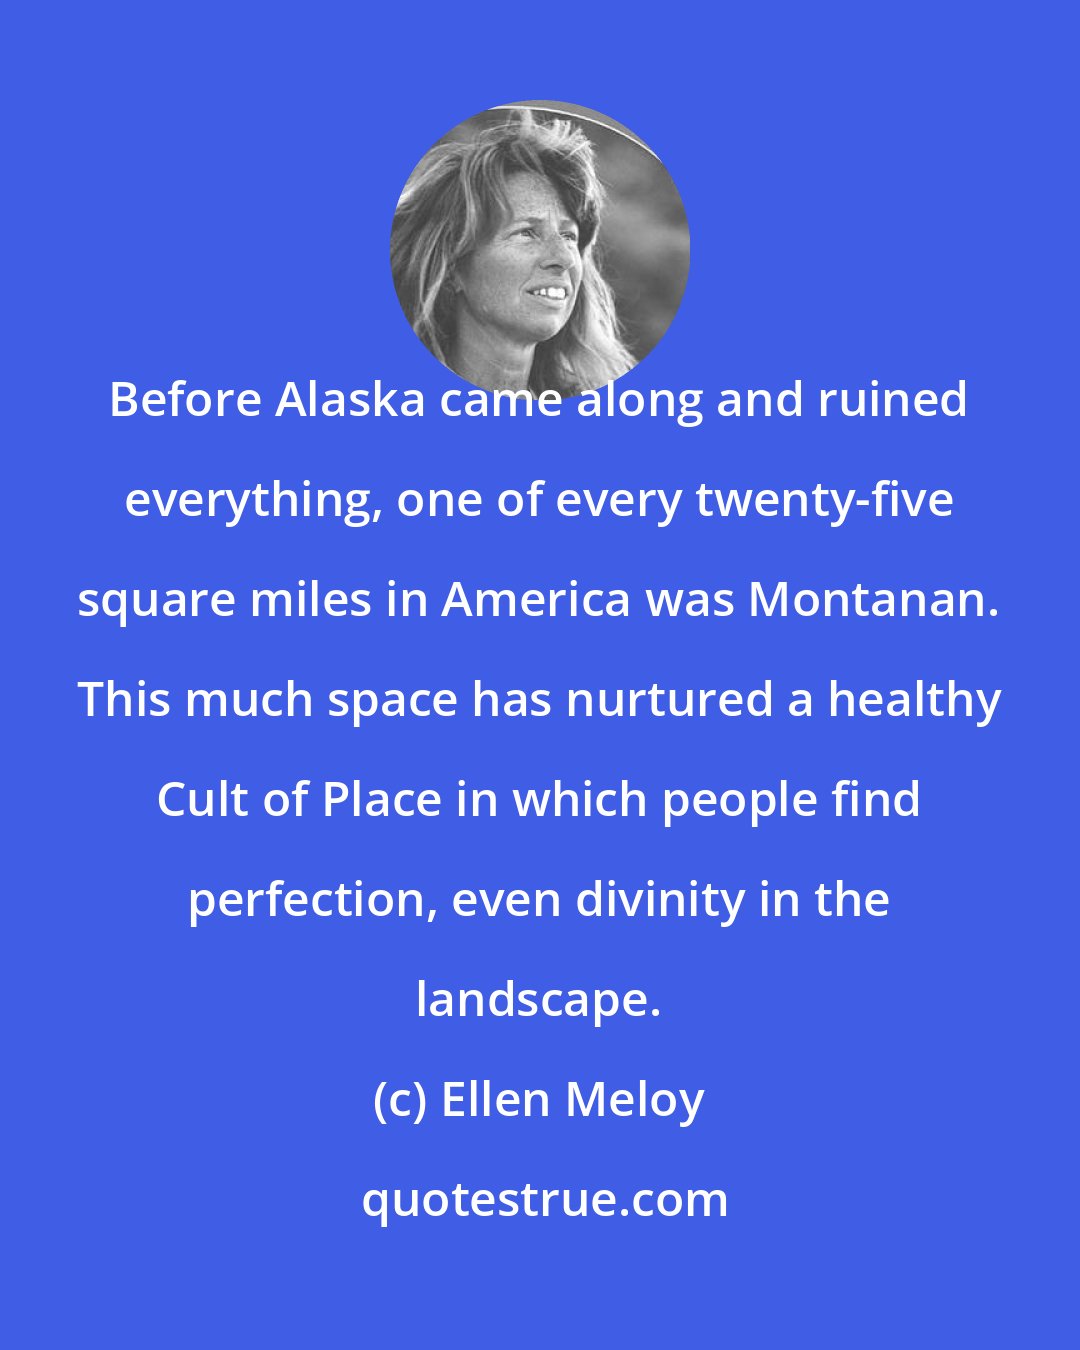 Ellen Meloy: Before Alaska came along and ruined everything, one of every twenty-five square miles in America was Montanan. This much space has nurtured a healthy Cult of Place in which people find perfection, even divinity in the landscape.